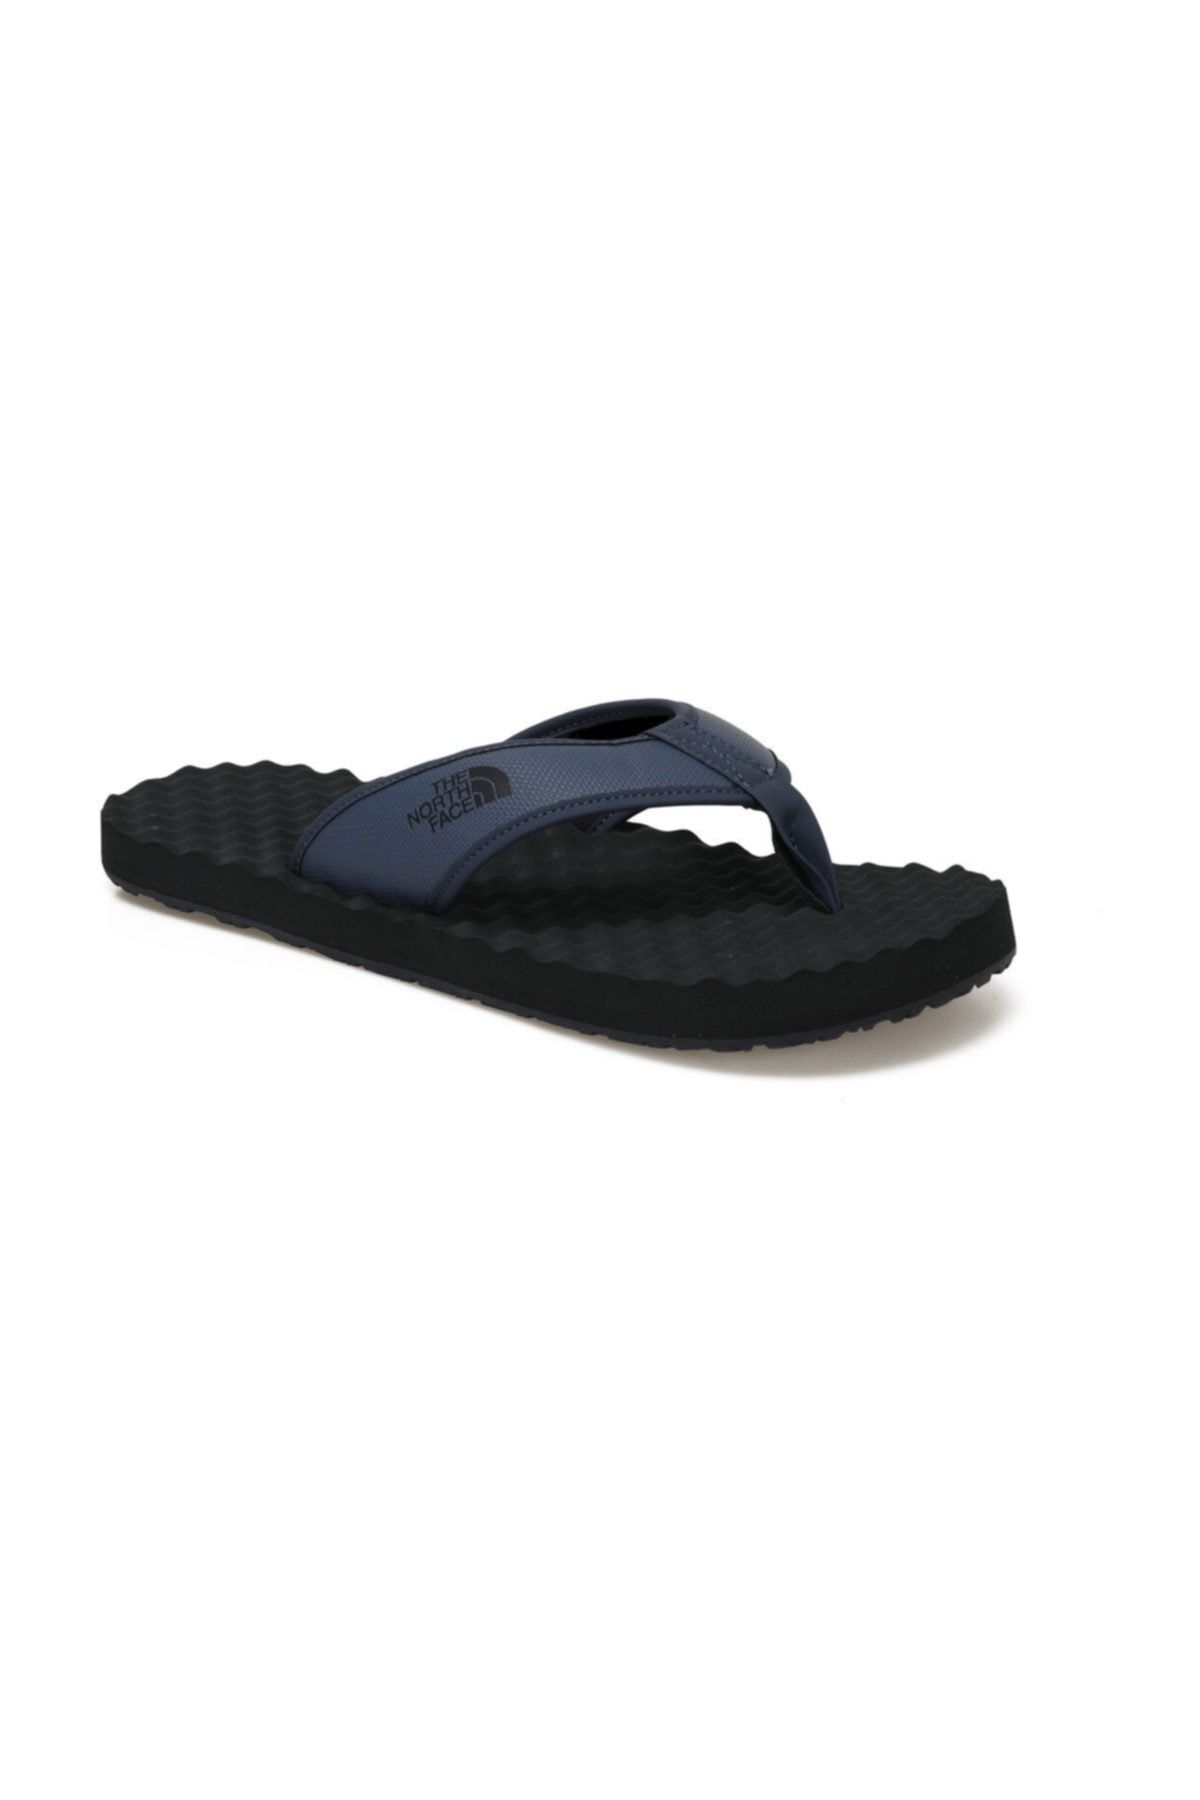 The North Face NF0A47AALKM1 SLIPPER مردان آبی 100576766